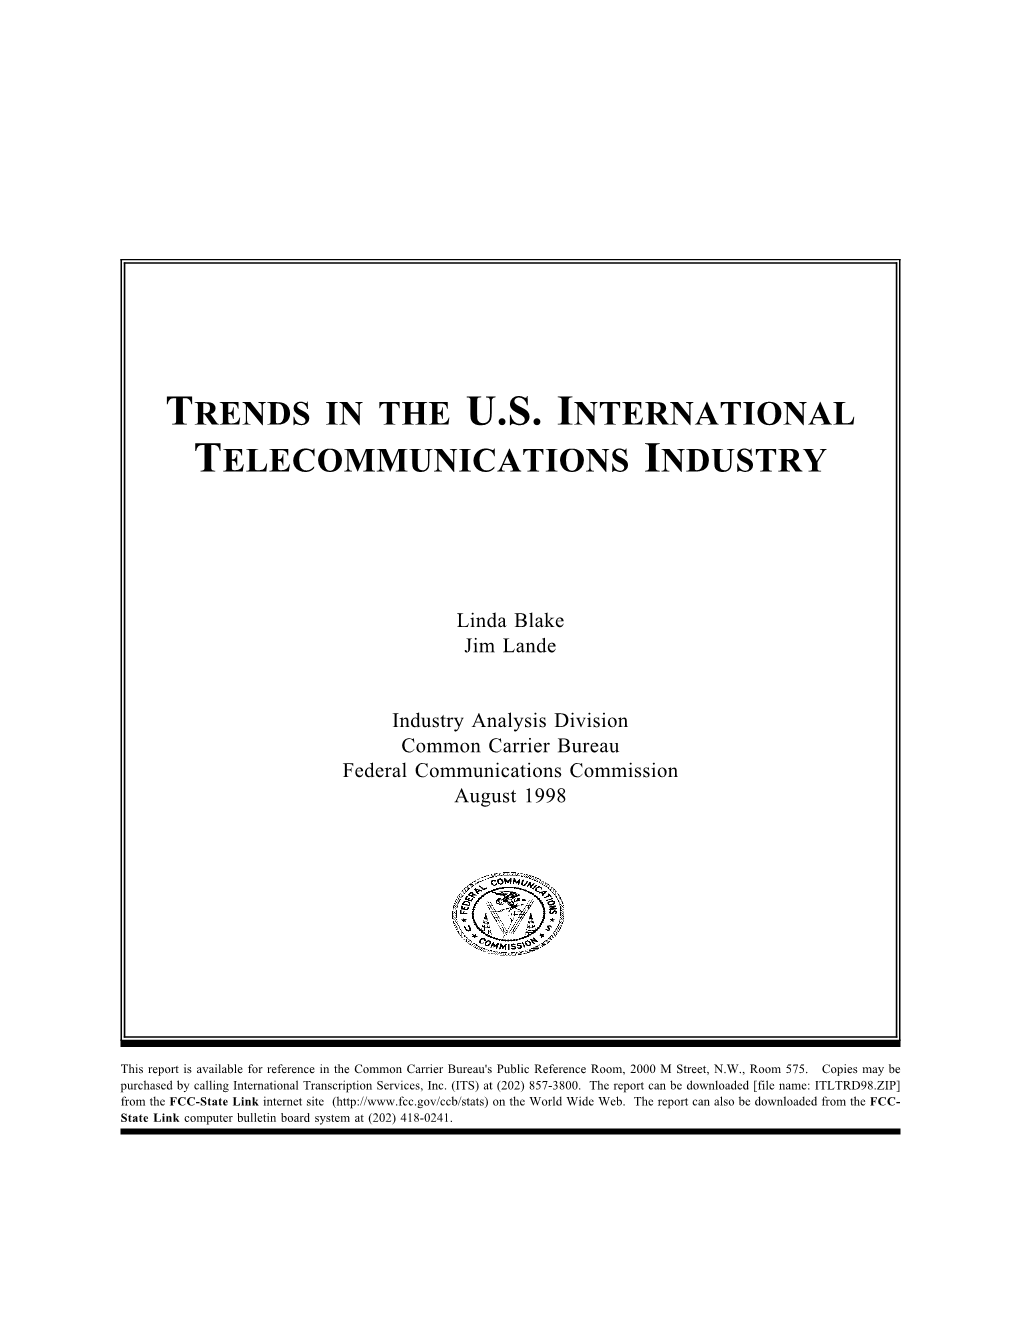 Trends in the U.S. International Telecommunications Industry